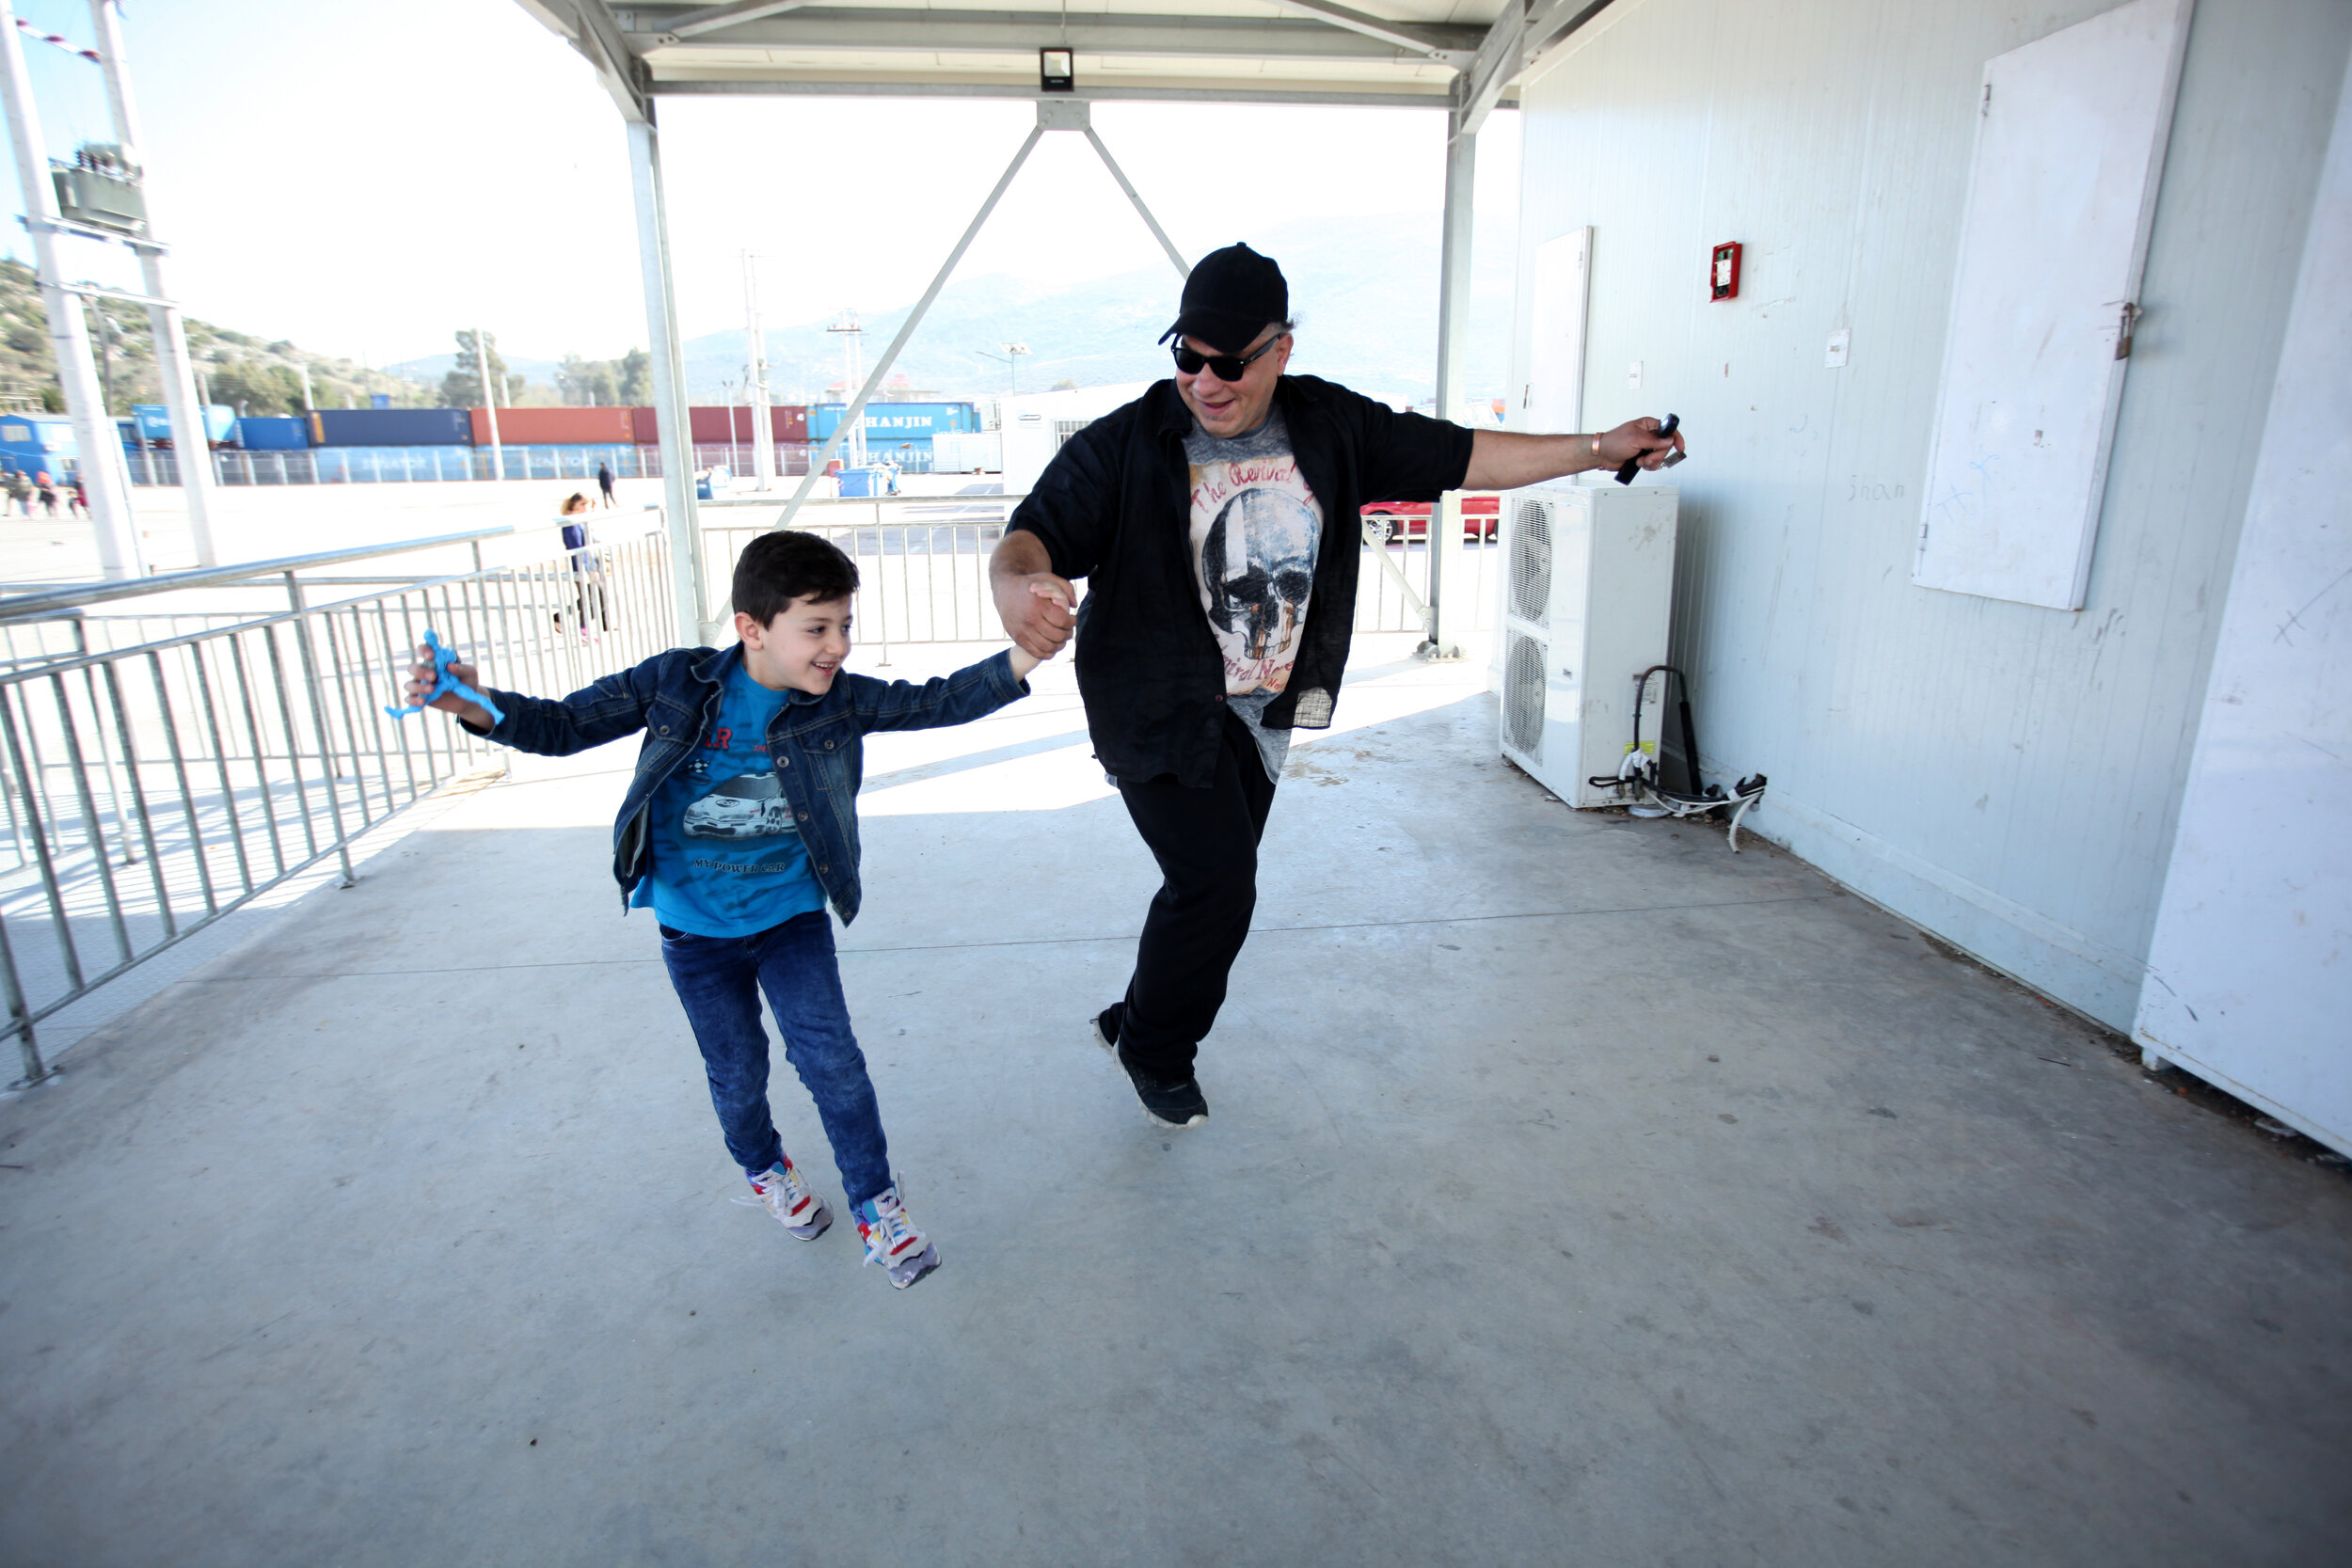  Allied Aid volunteer Fadi Sayde dances with a boy who lives at the Skaramagas refugee camp in Athens, Greece.  